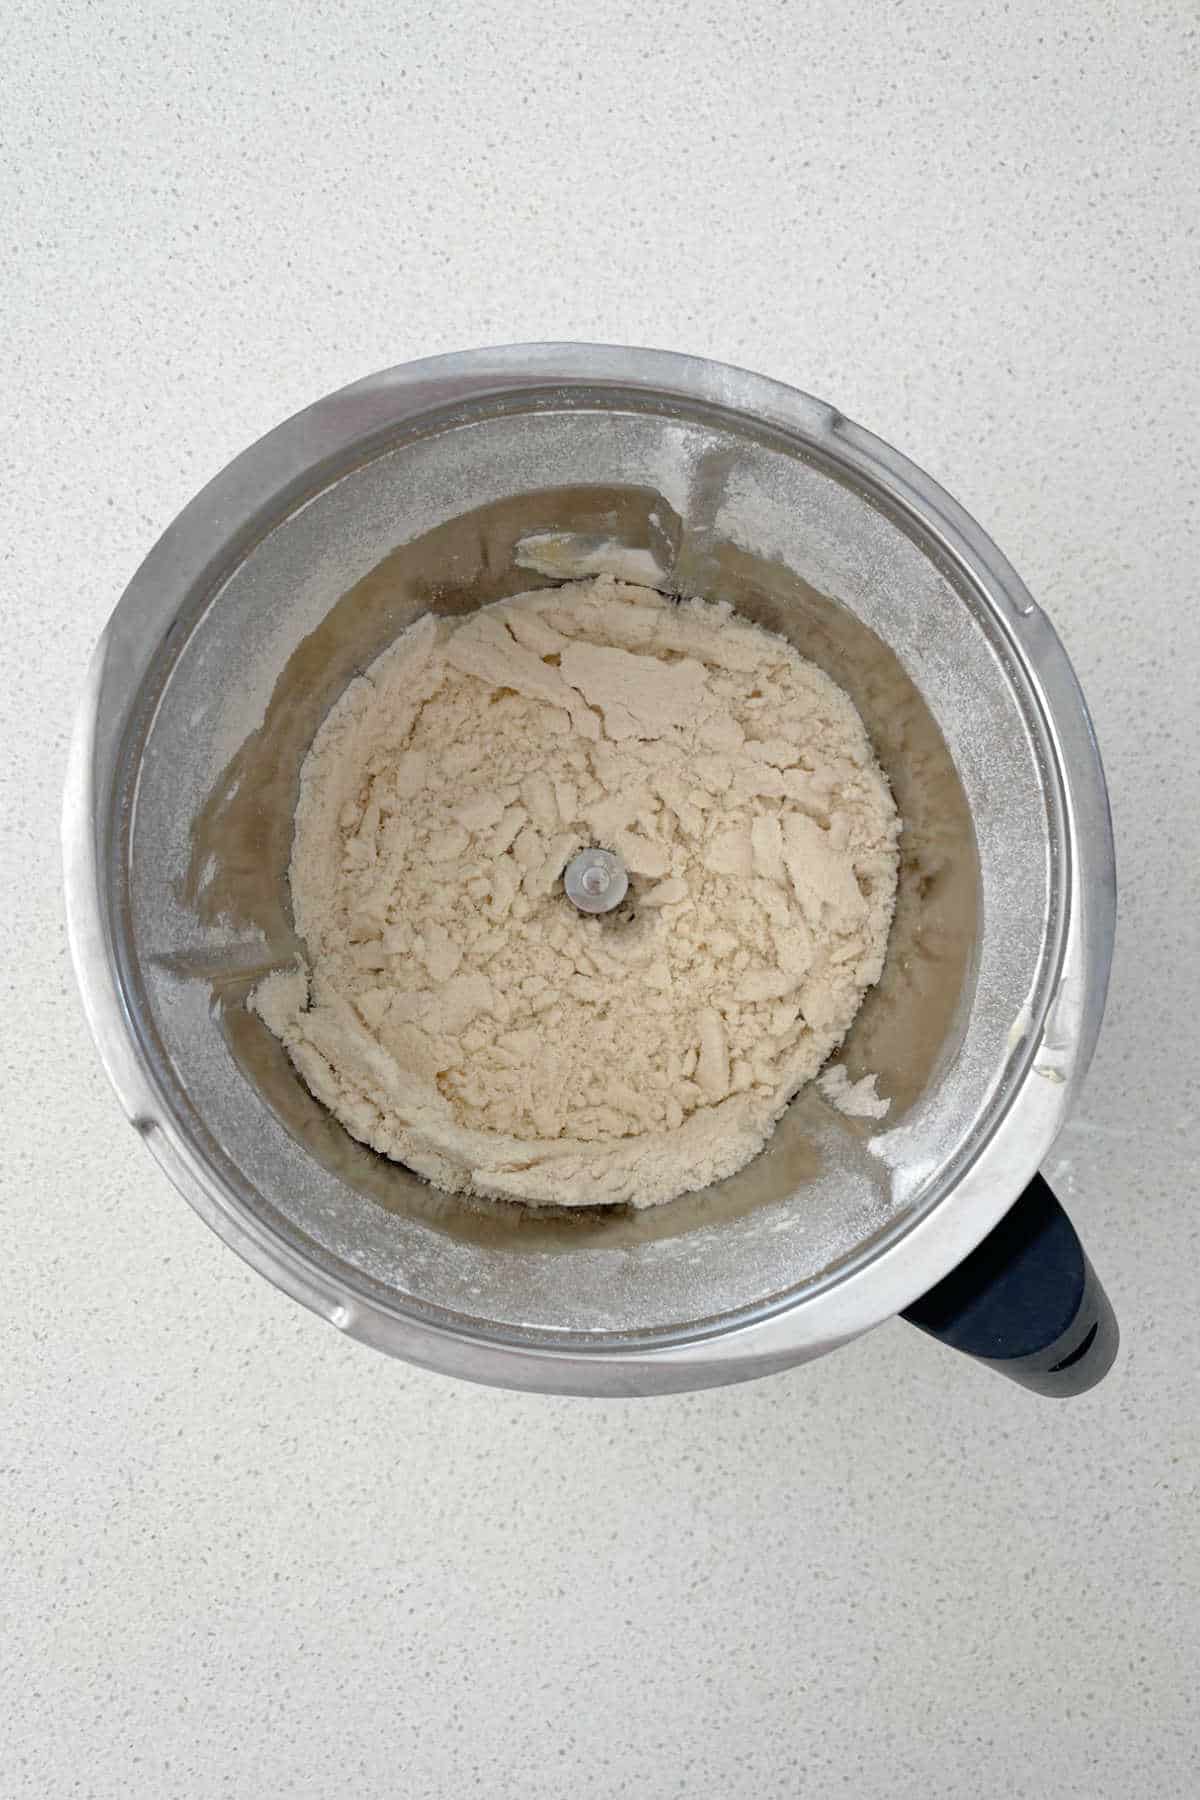 butter, self-raising flour and baking powder combined in a thermomix bowl.